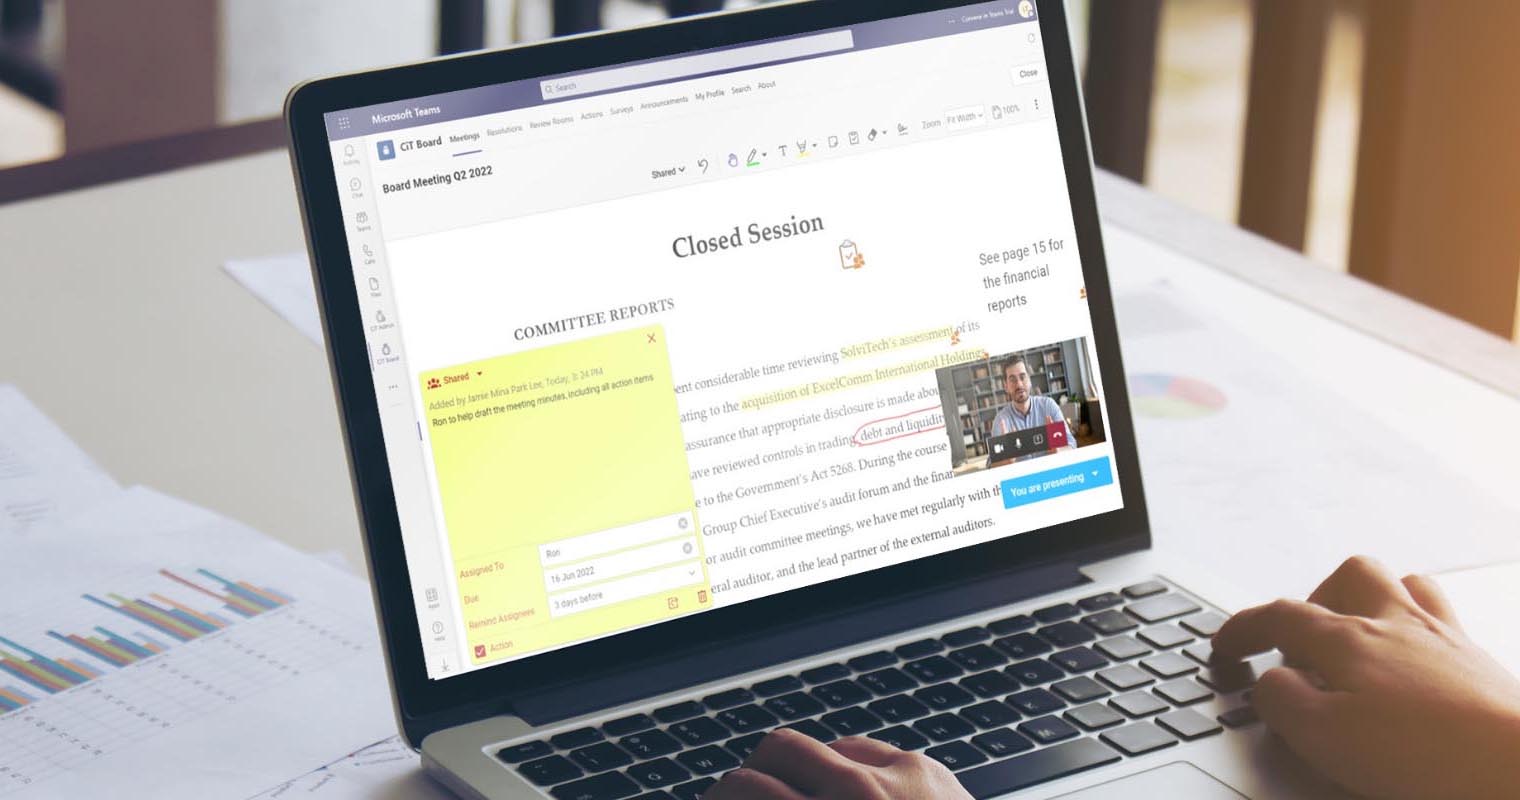 With CiT, collaborate easily on documents and meetings in just one screen